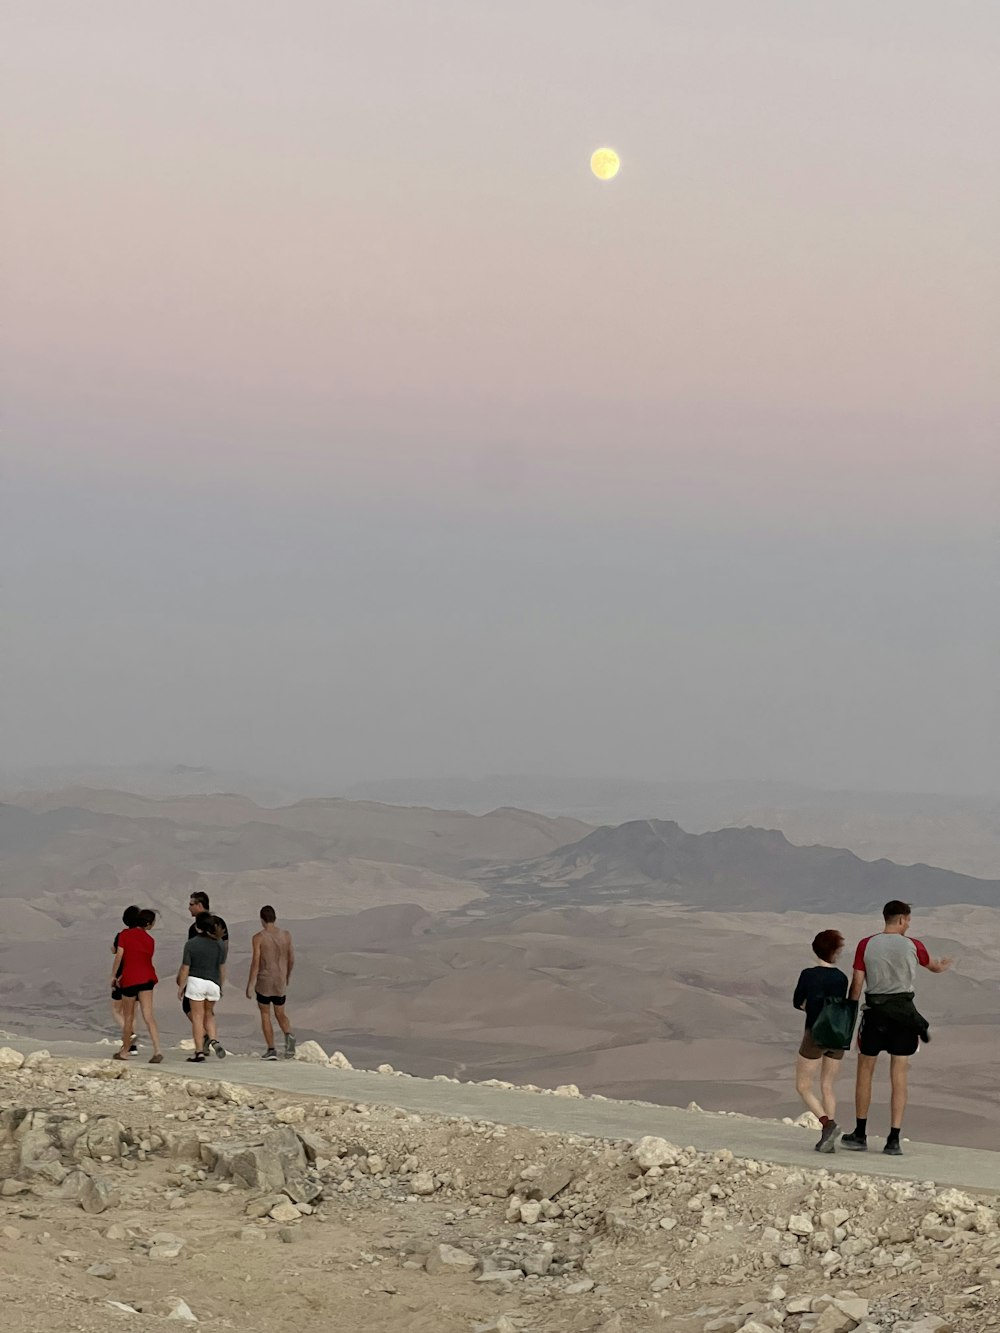 a group of people walking on a rocky hill with a moon in the sky